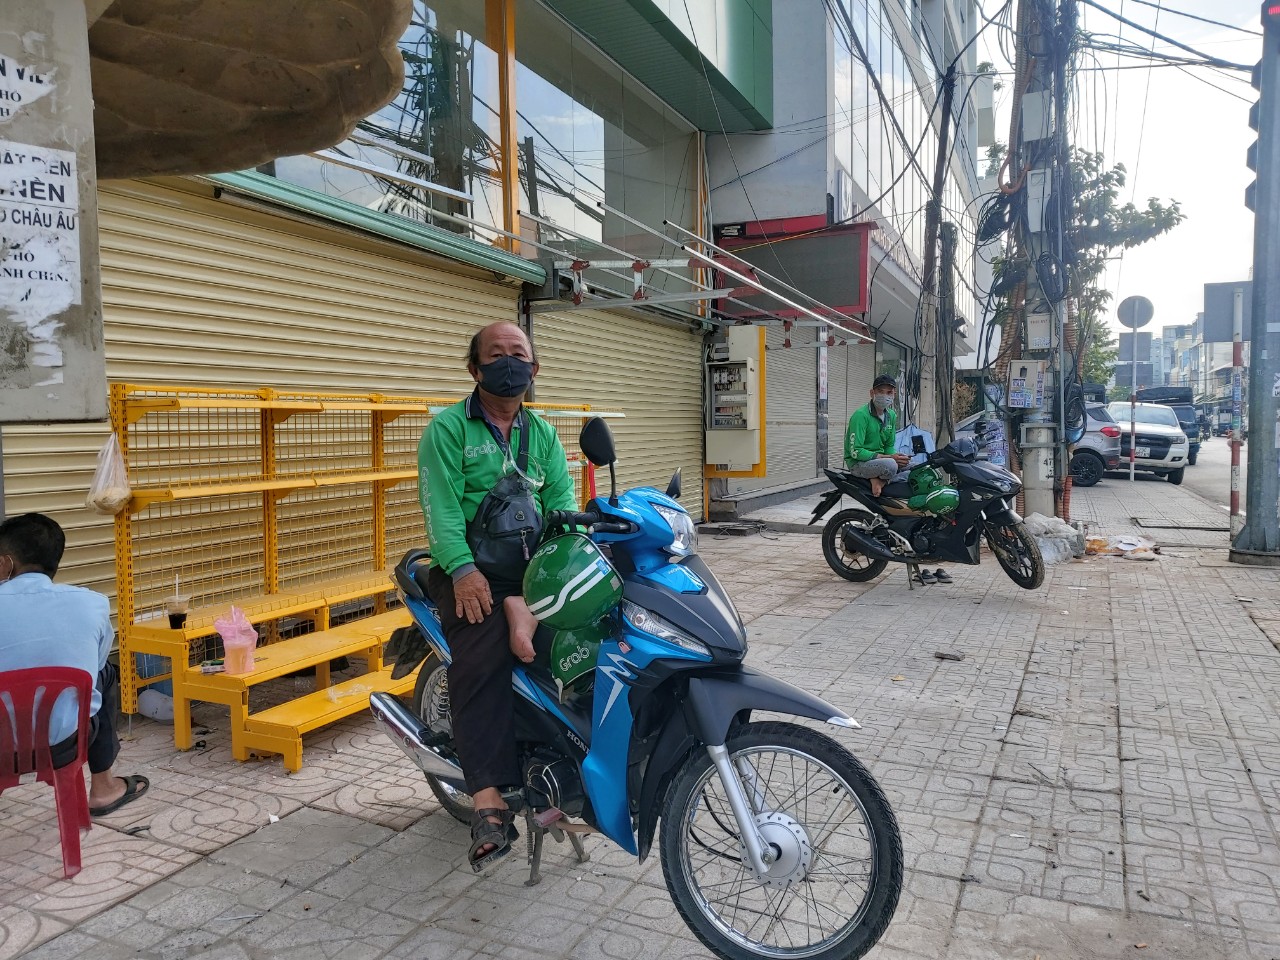 Motorbike taxi drivers keep a distance of two meters